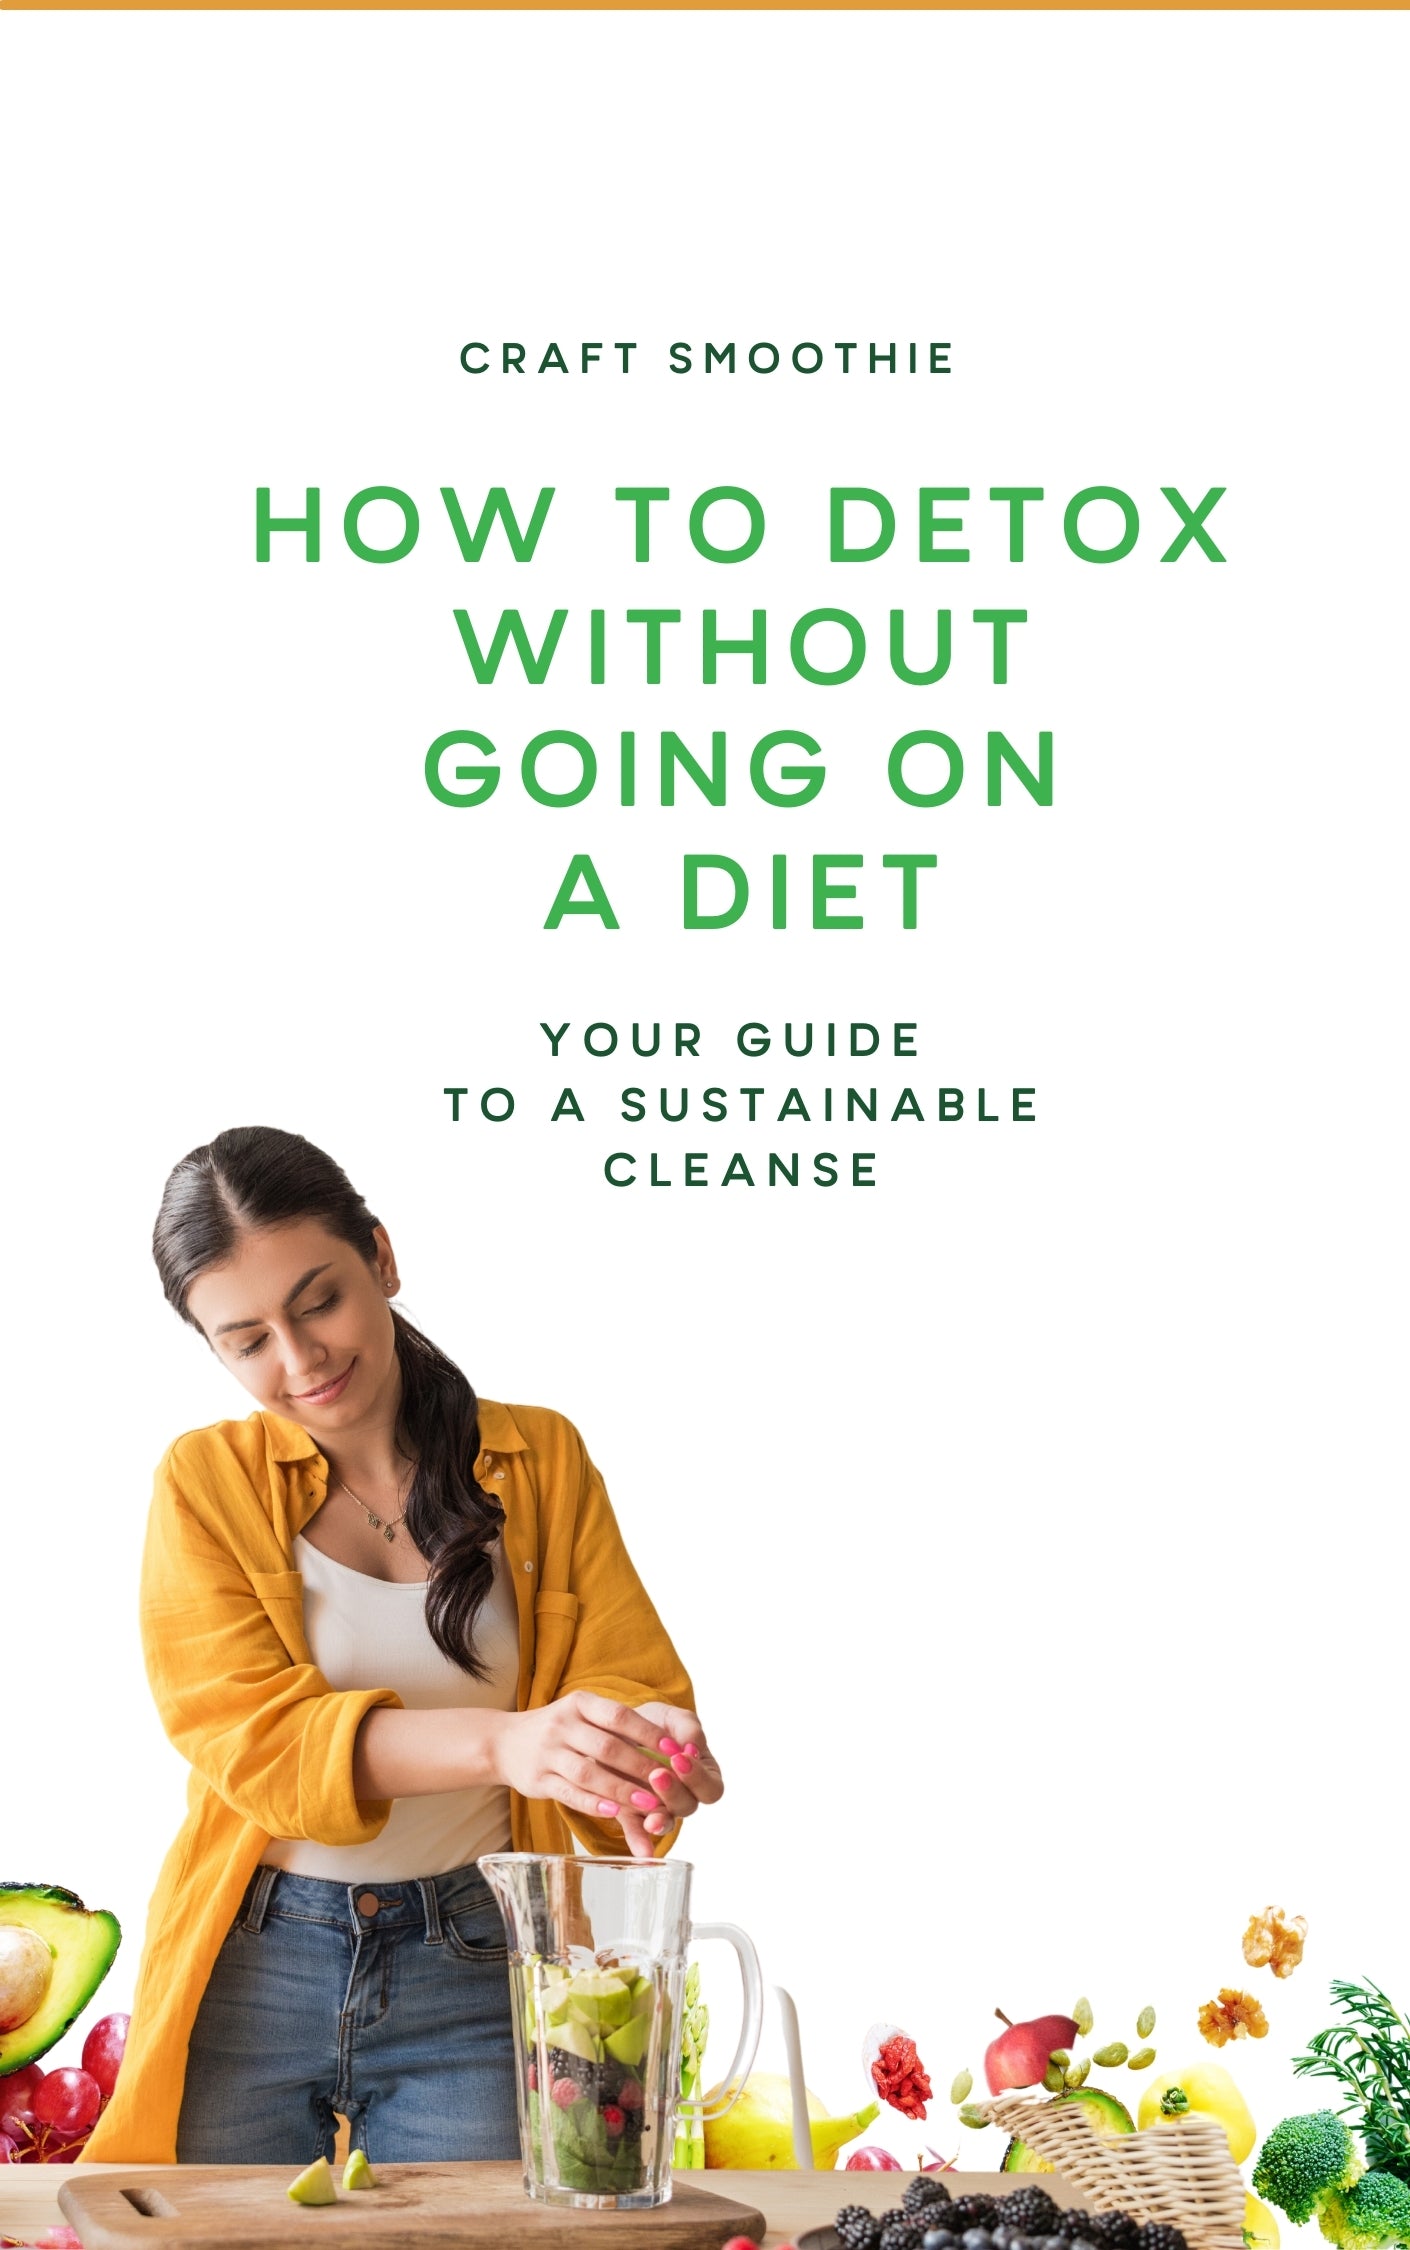 How To Detox Without Going On A Diet eBook